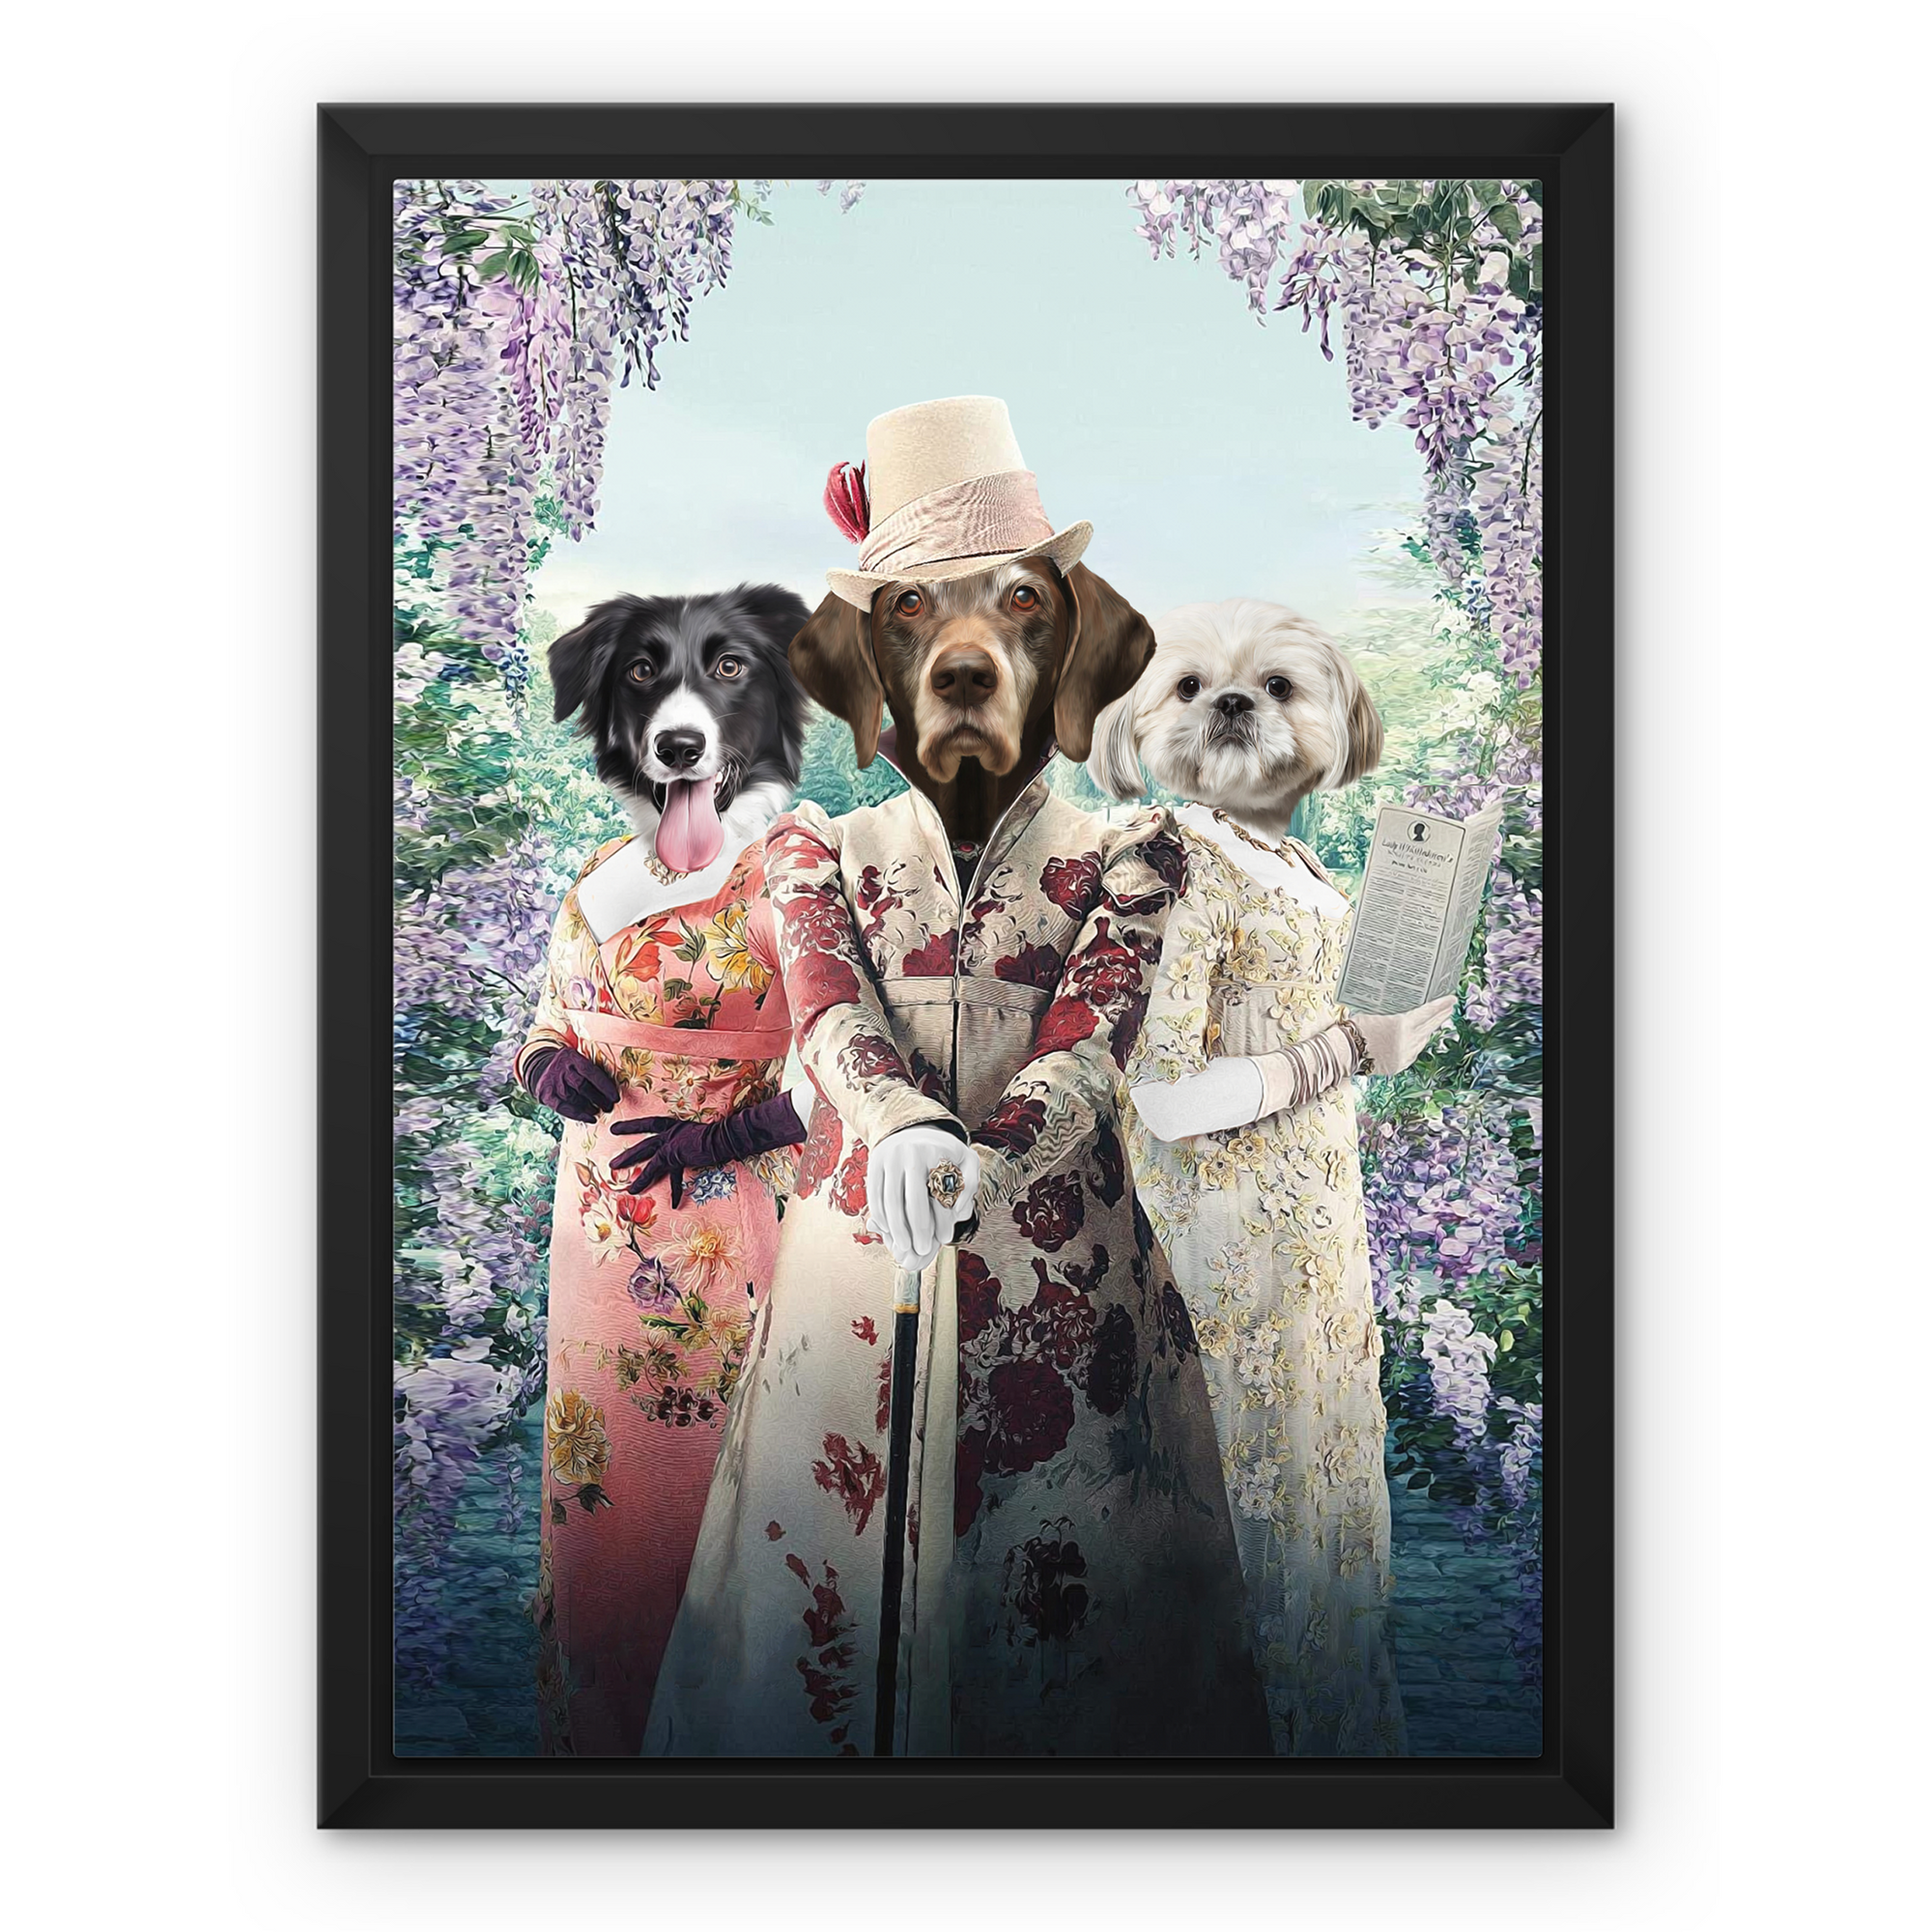 Paw & Glory, paw and glory, funny dog paintings, drawing pictures of pets, dog portraits singapore, minimal dog art, pet photo clothing, animal portrait pictures, pet portrait